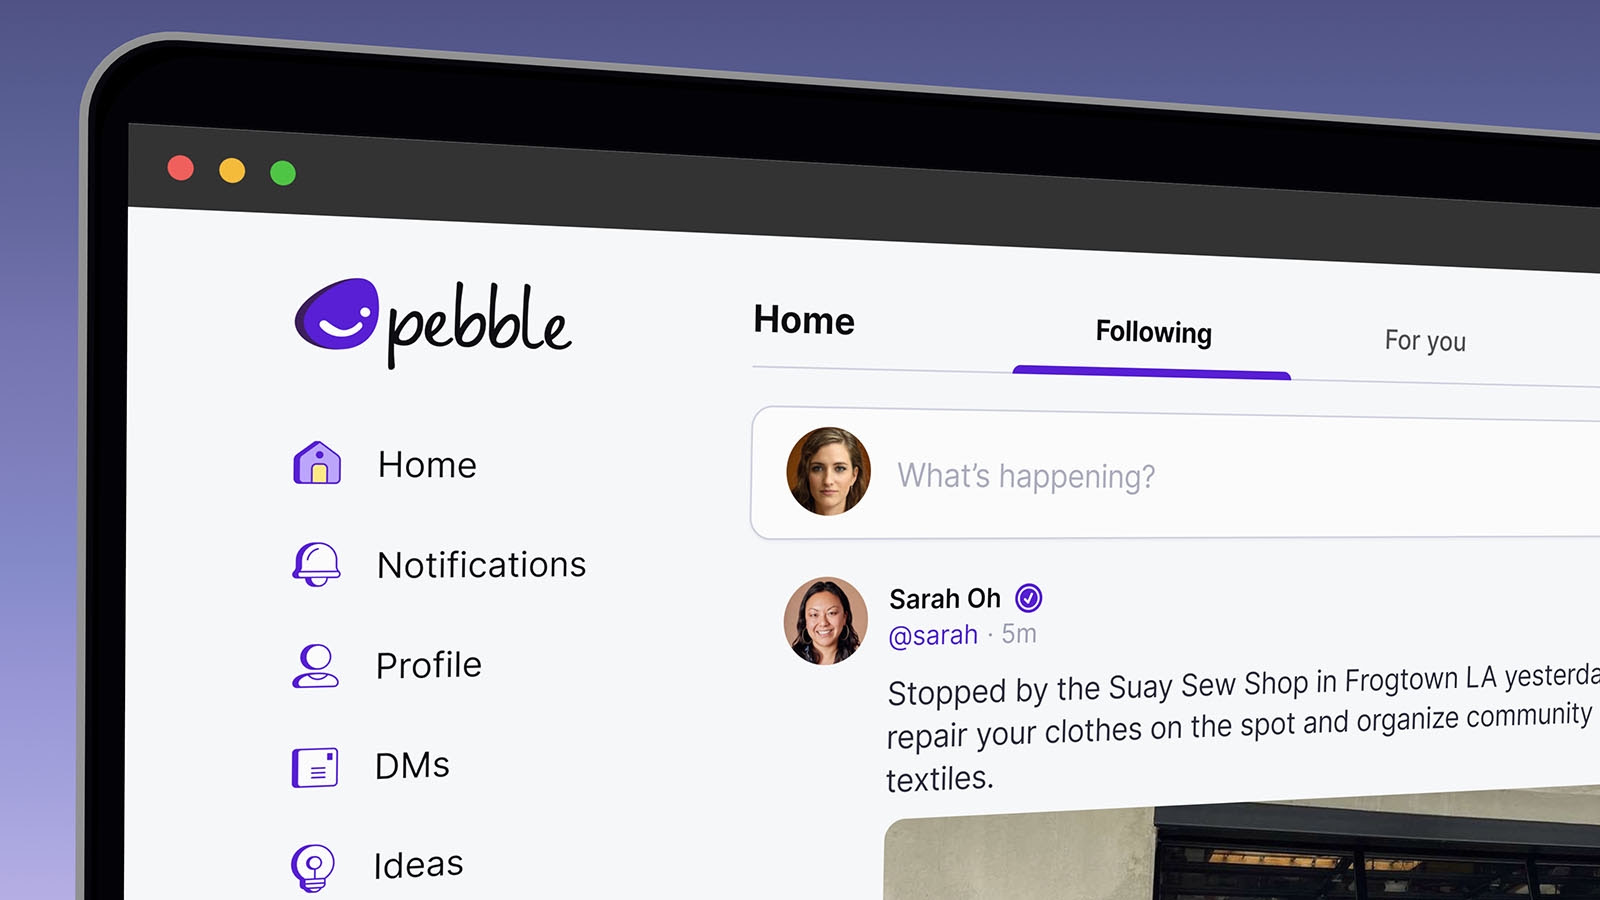 Twitter/X rival T2 rebrands as ‘Pebble,’ saying the old name was never meant to be permanent